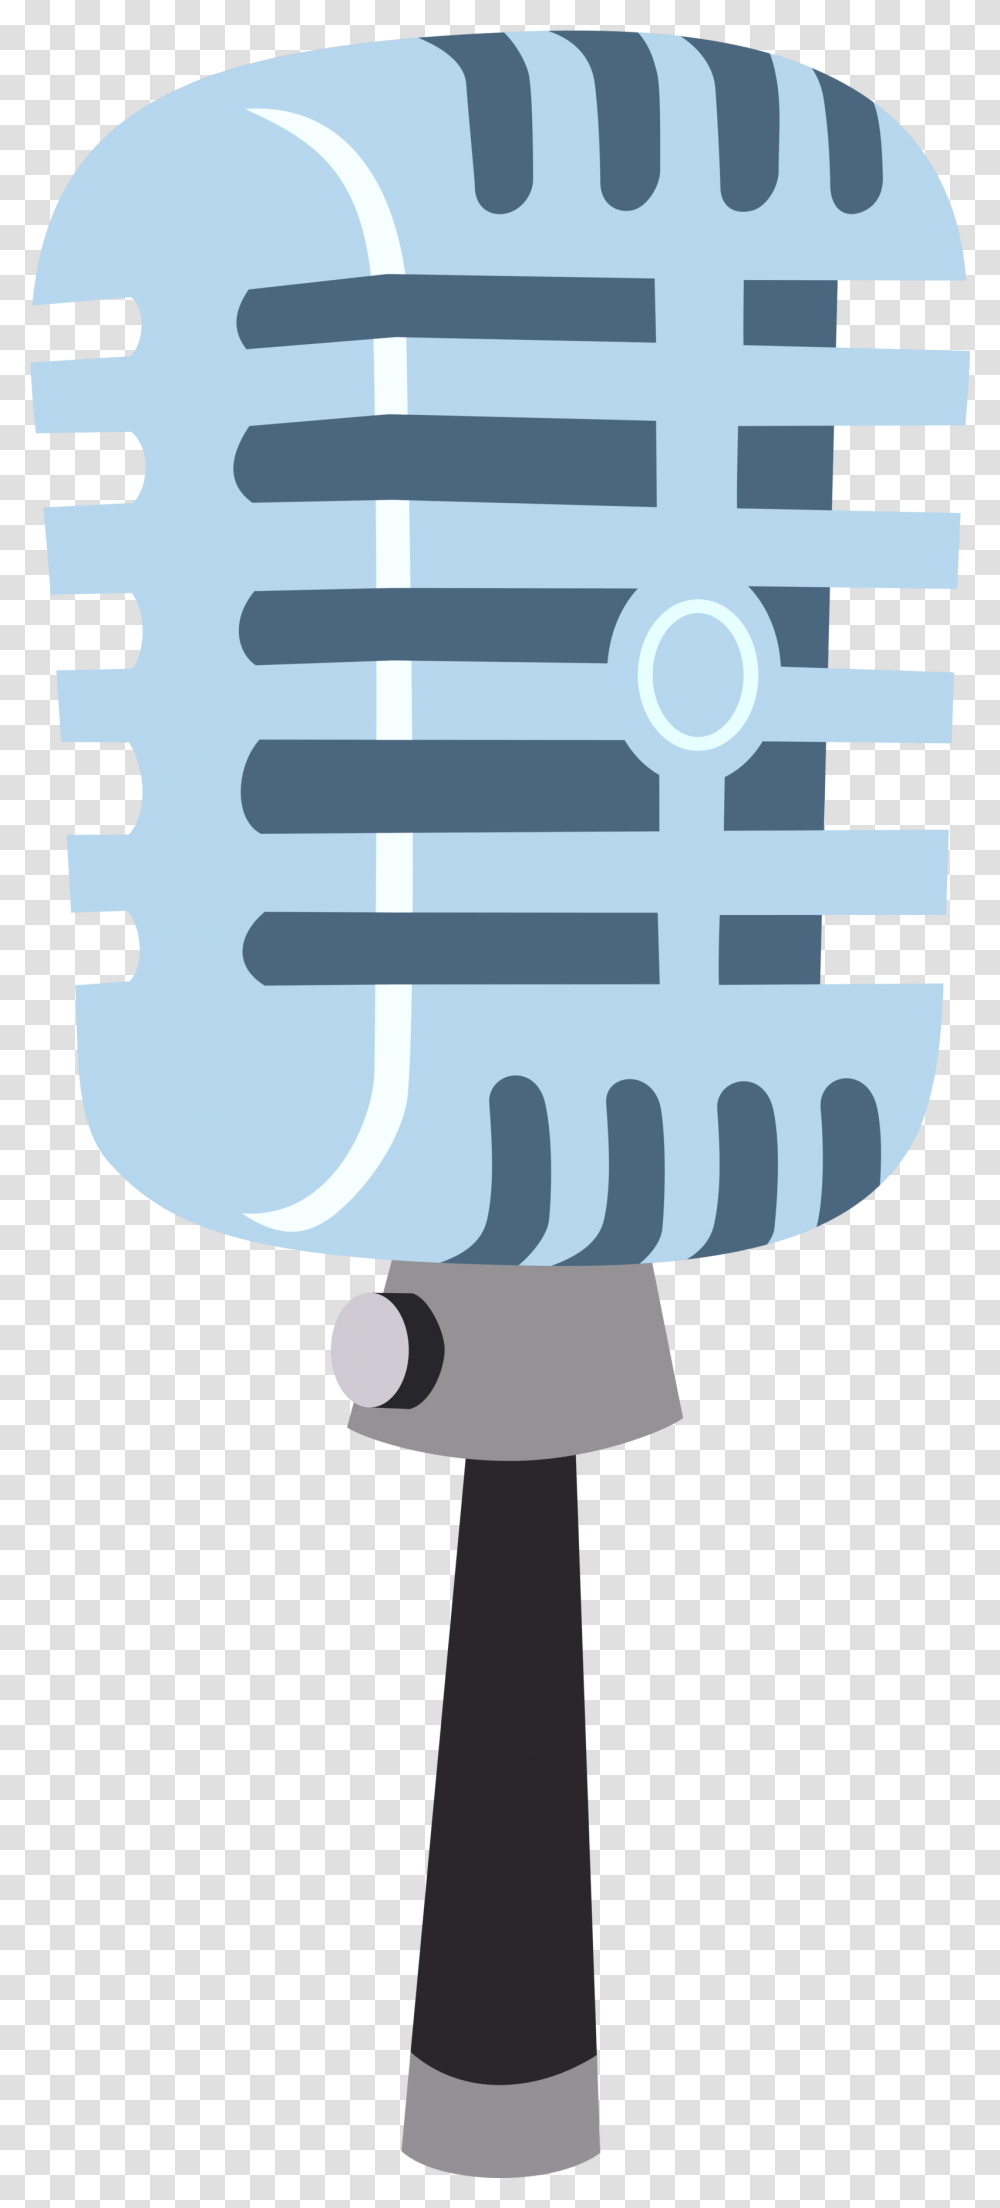 Microphone Image Arts Vector Microphone Clipart, Weapon, Weaponry, Cross, Symbol Transparent Png